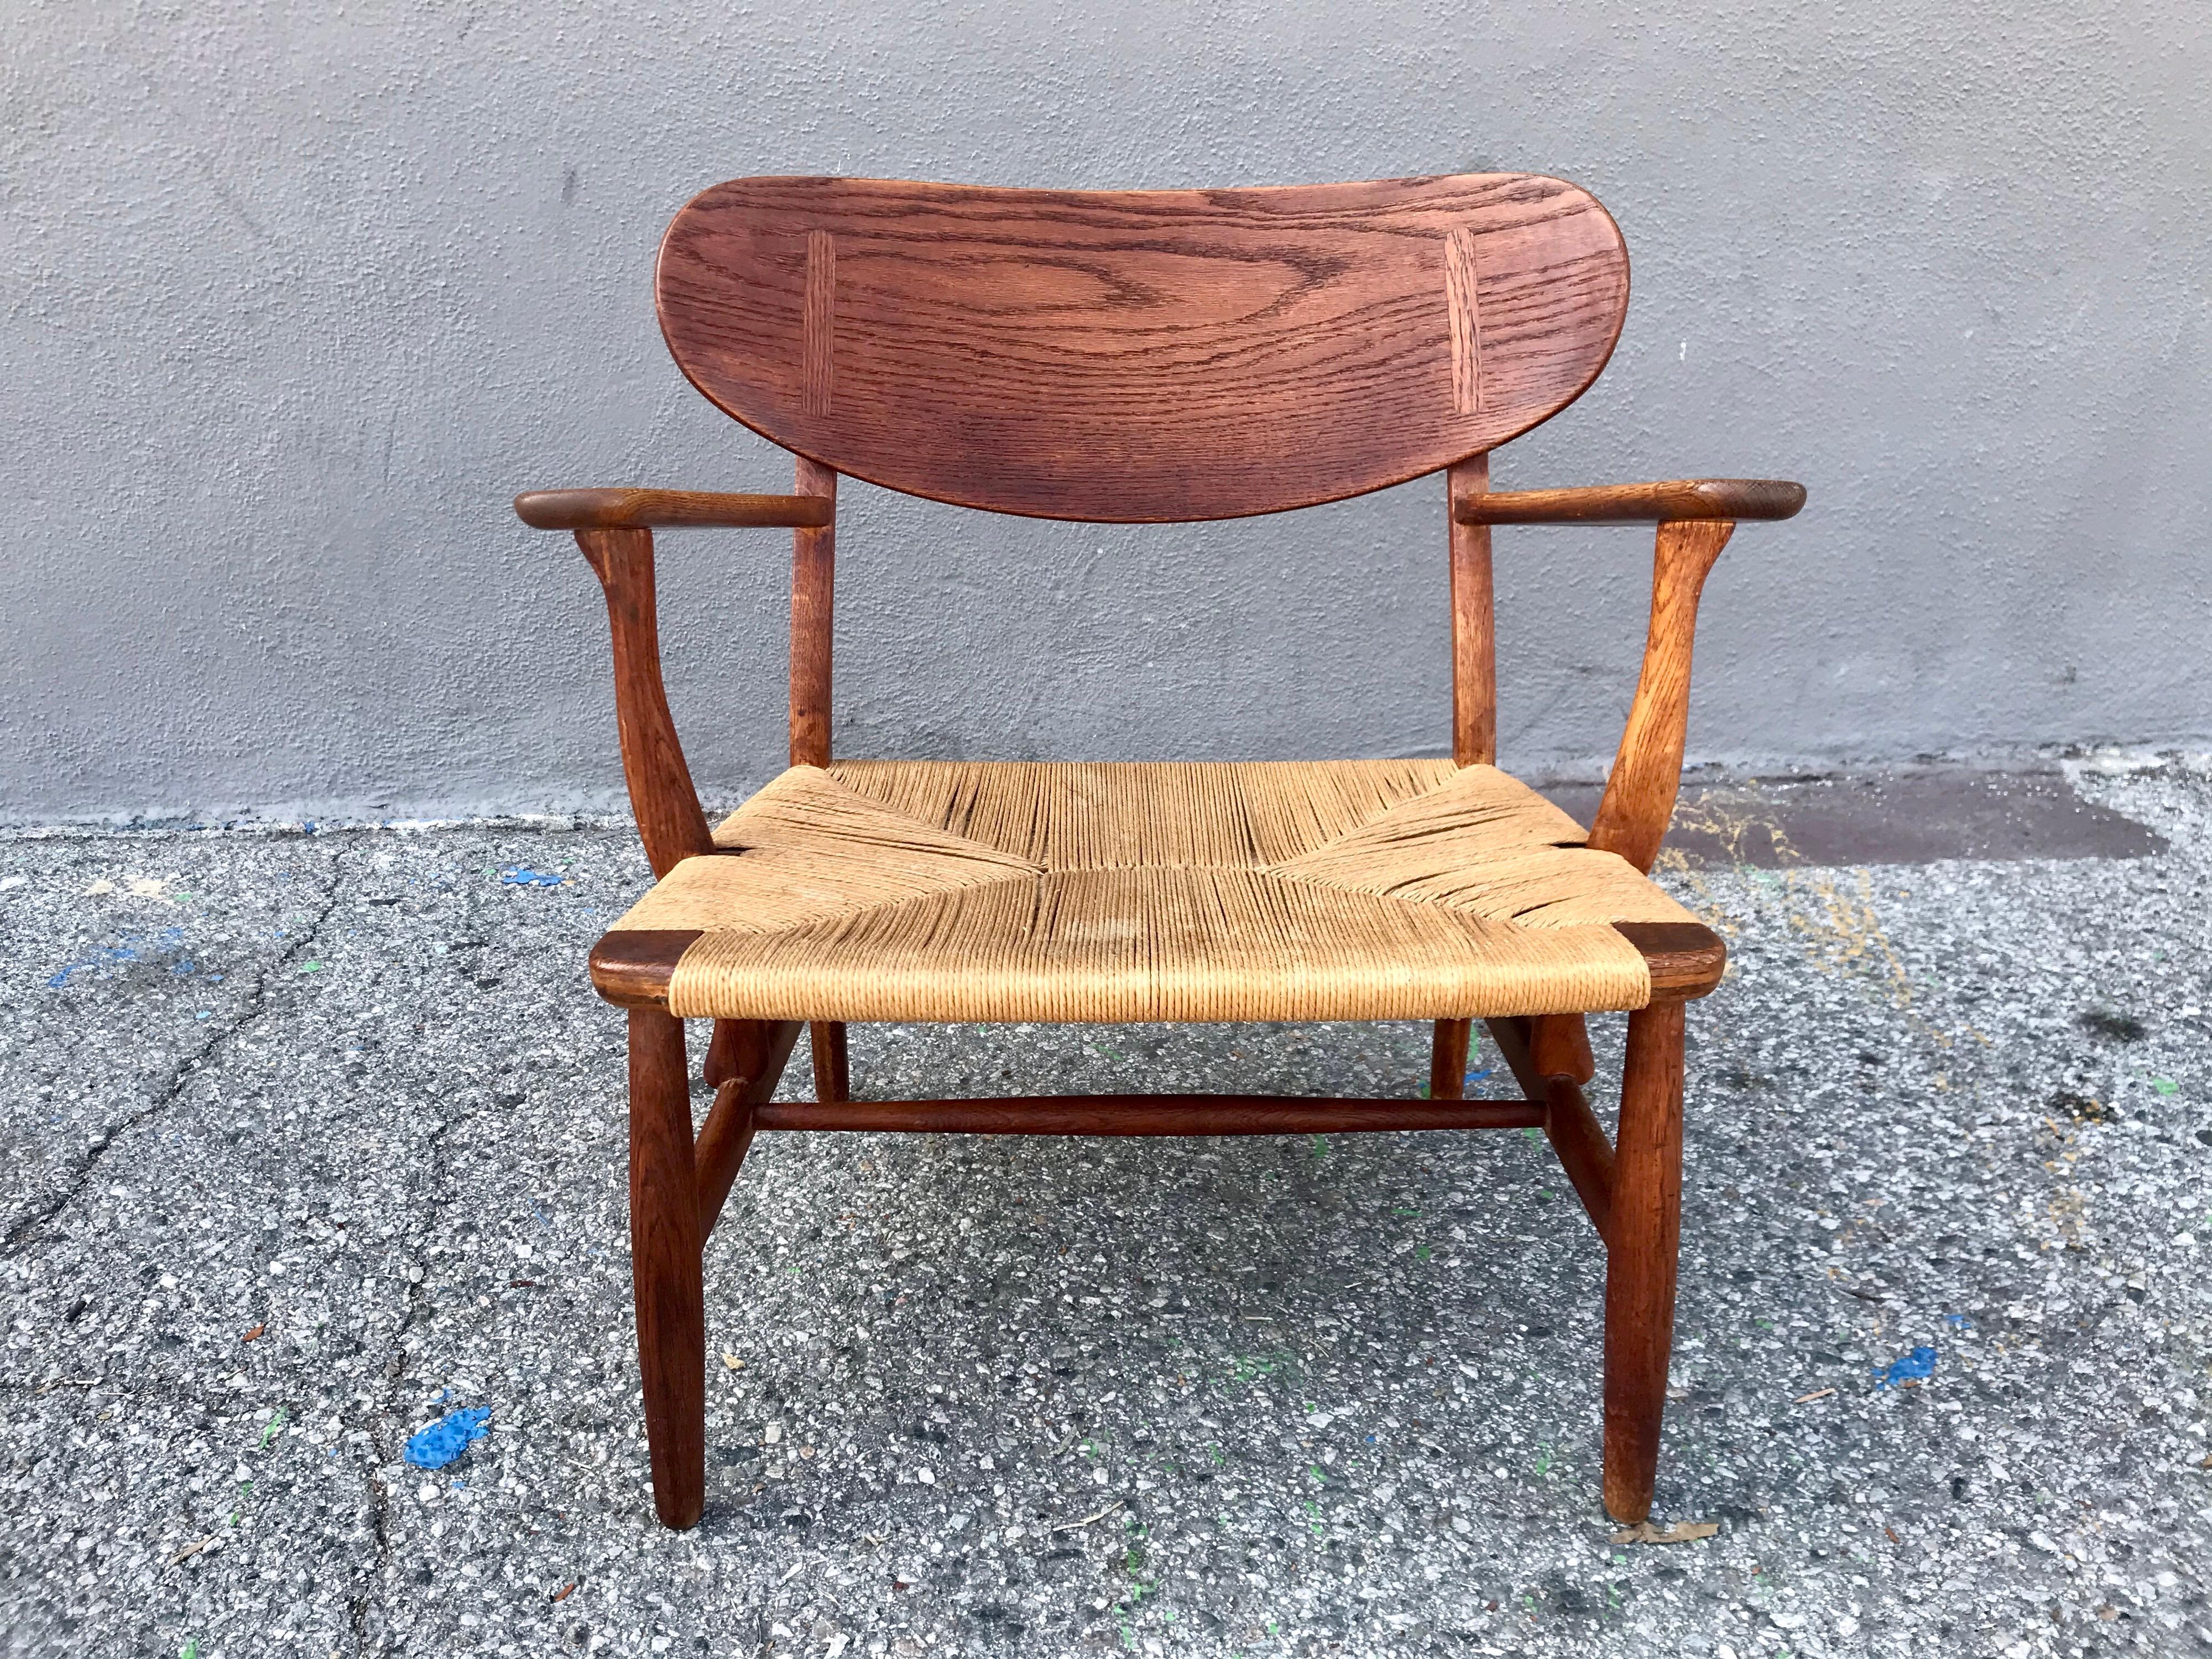 classic Danish modern design
solid teak and oak wood with original paper-cord seat
original vintage condition showing minor wear with a nice patina
great for a collection or use as an accent for any interior
  